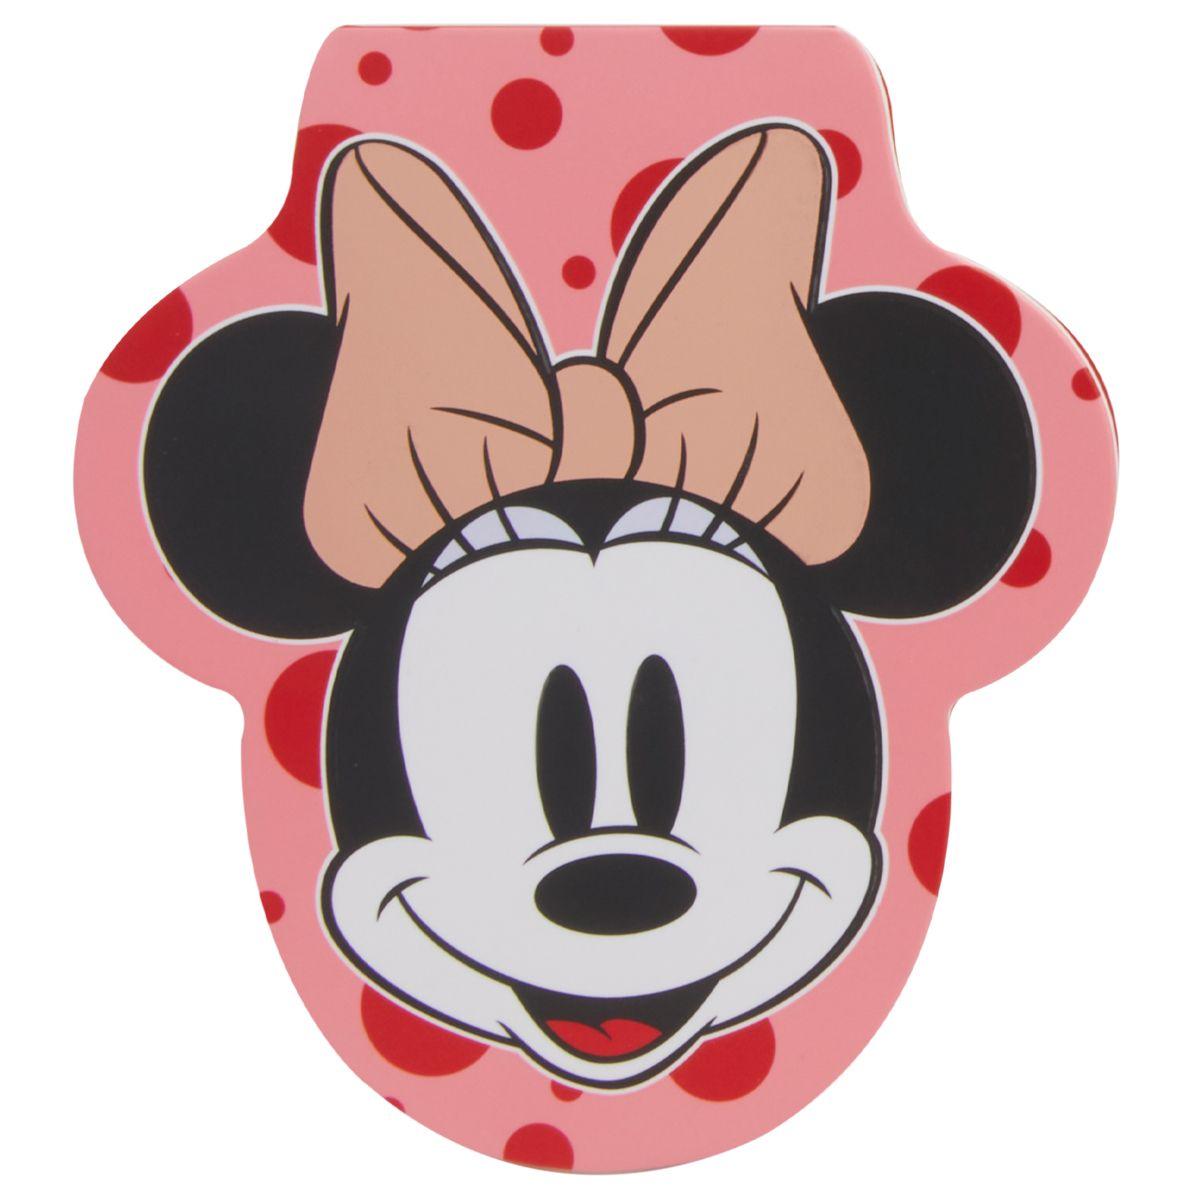 Selected image for MAKEUP REVOLUTION Disney"s Minnie Mouse Duo rumenilo, 8.4 g